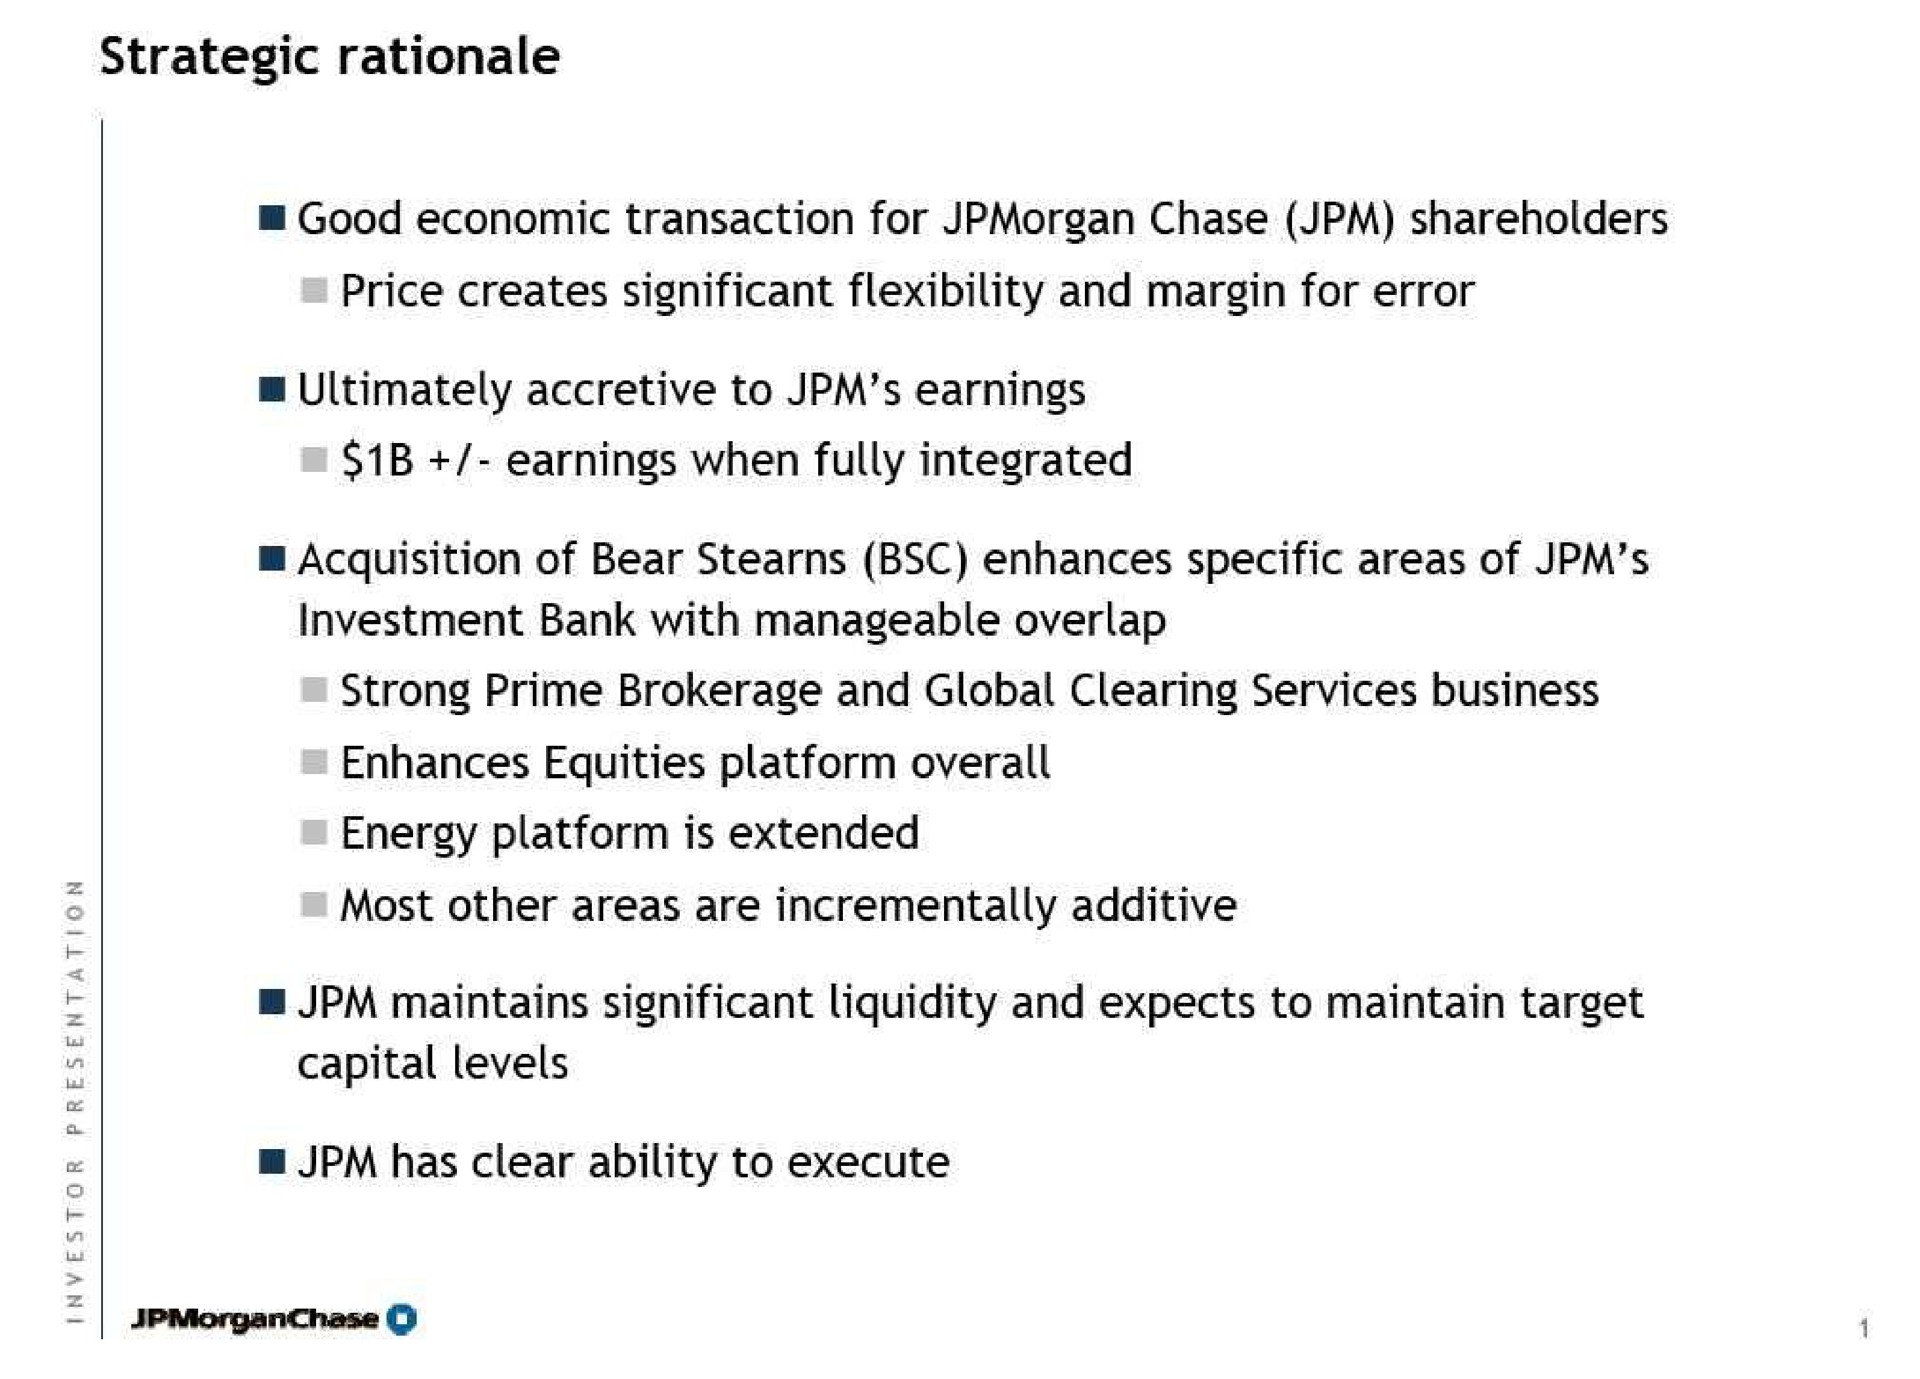 strategic rationale good economic transaction for chase shareholders price creates significant flexibility and margin for error ultimately accretive to earnings earnings when fully integrated acquisition of bear enhances specific areas of investment bank with manageable overlap strong prime brokerage and global clearing services business enhances equities platform overall energy platform is extended most other areas are additive maintains significant liquidity and expects to maintain target capital levels has clear ability to execute | J.P.Morgan